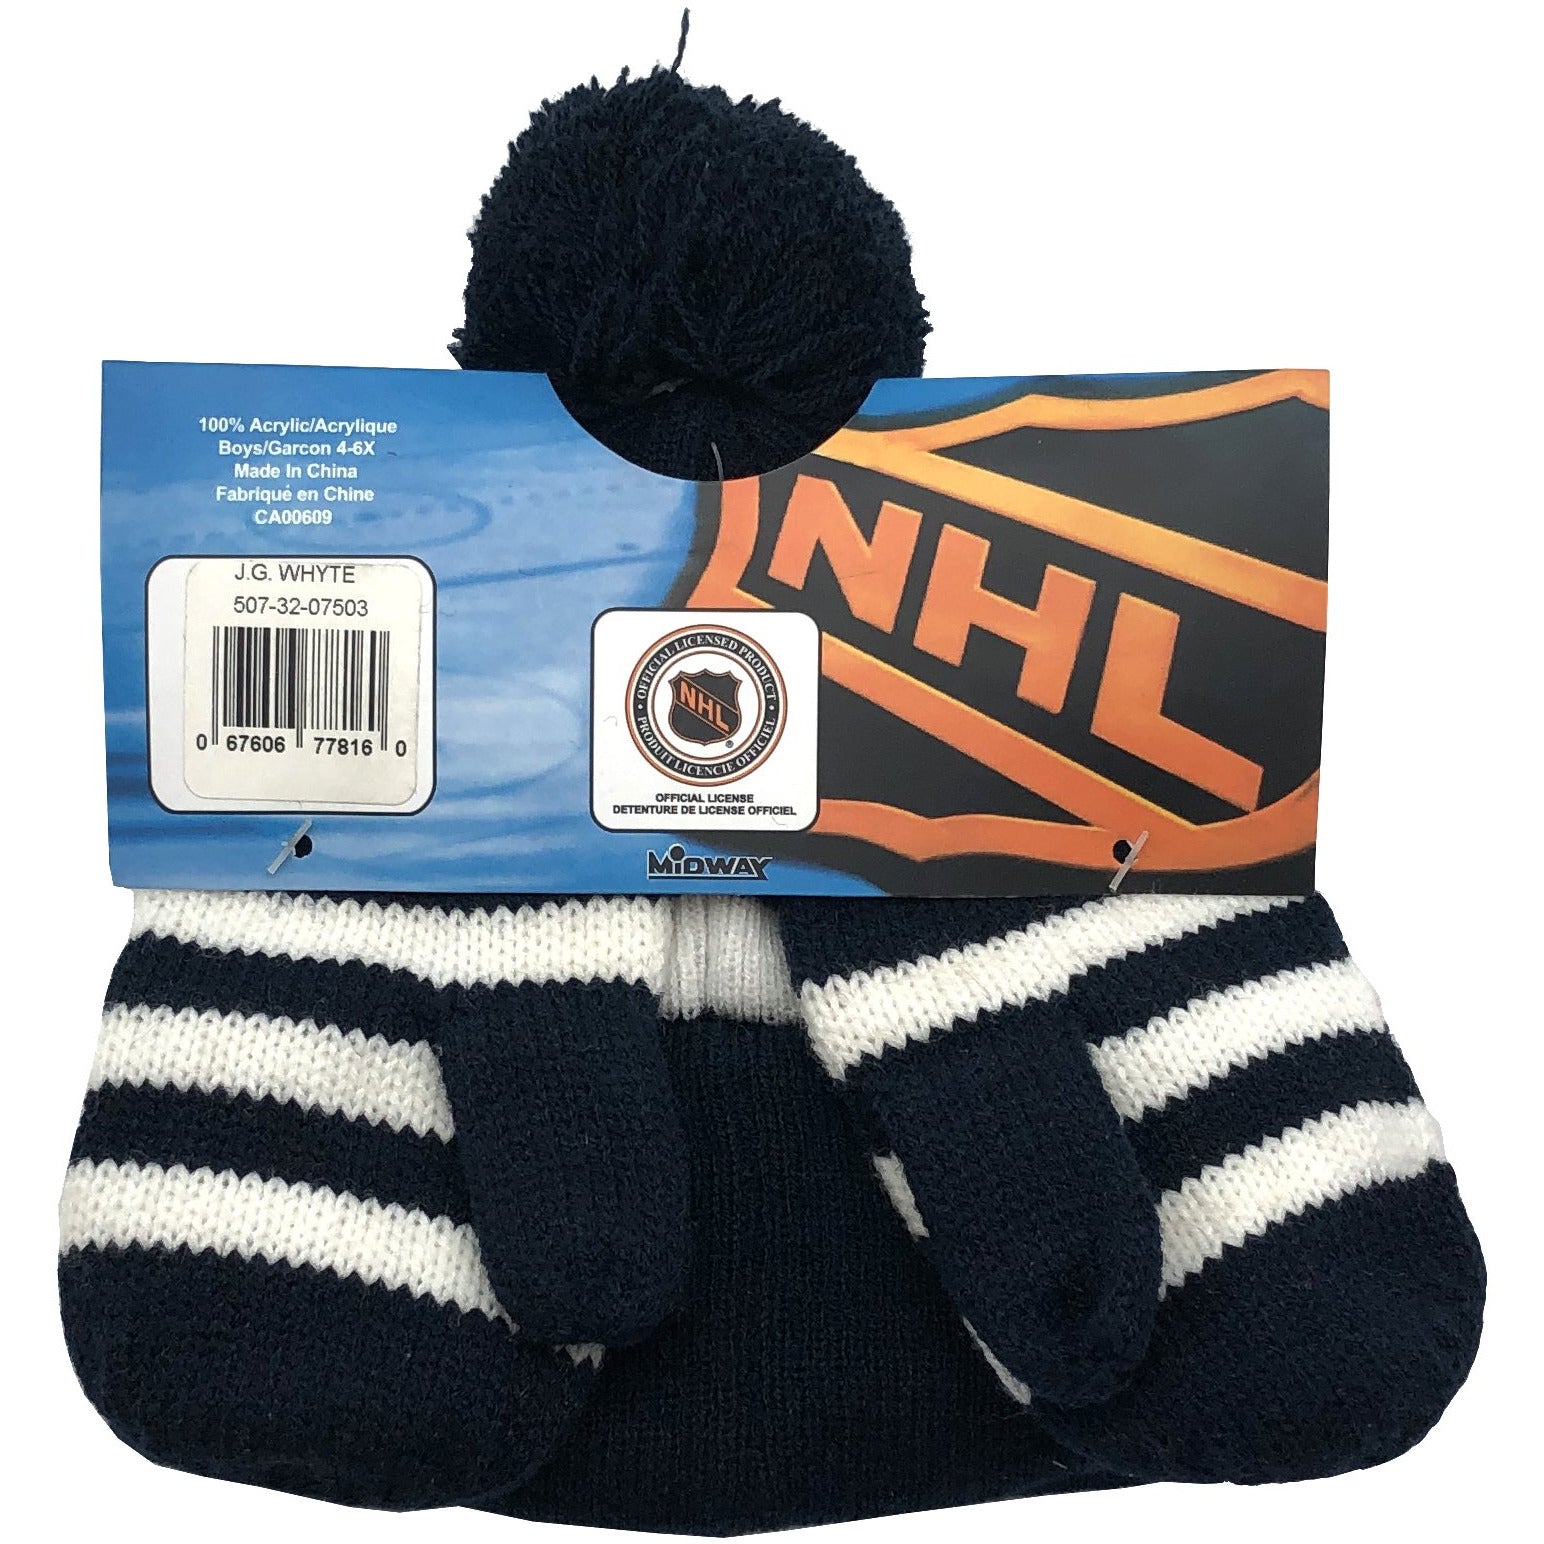 NHL Infant Winter Hat with Mitts Set / Size 4-6X / Official NHL Apparel / 100% Acrylic / Mitts With Jacket String / Outerwear / Hockey / Kids